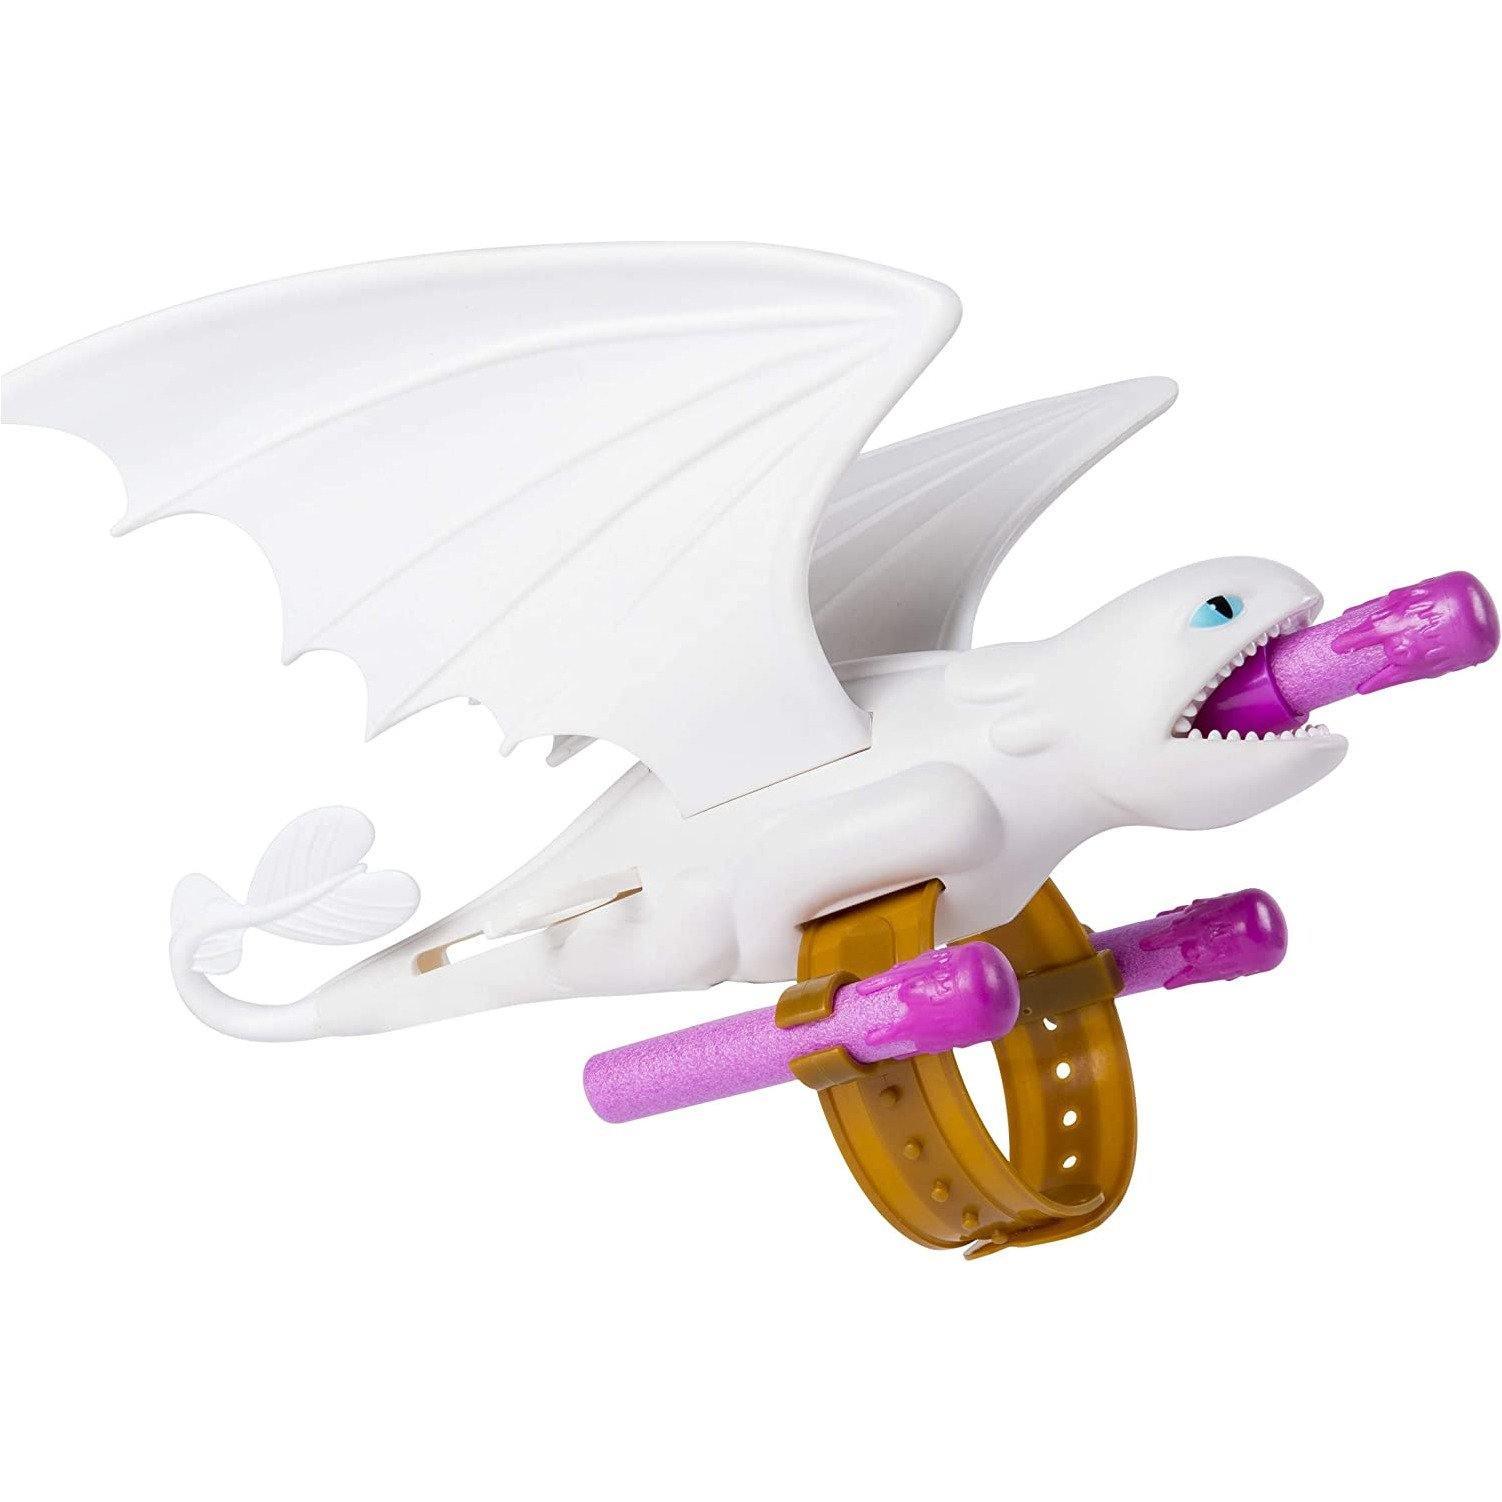 Spin Master How To Train Your Dragon Lightfury Dragon Wrist Launcher for Kids - BumbleToys - 5-7 Years, Blasters, Blasters & Water Pistols, Boys, Guns, OXE